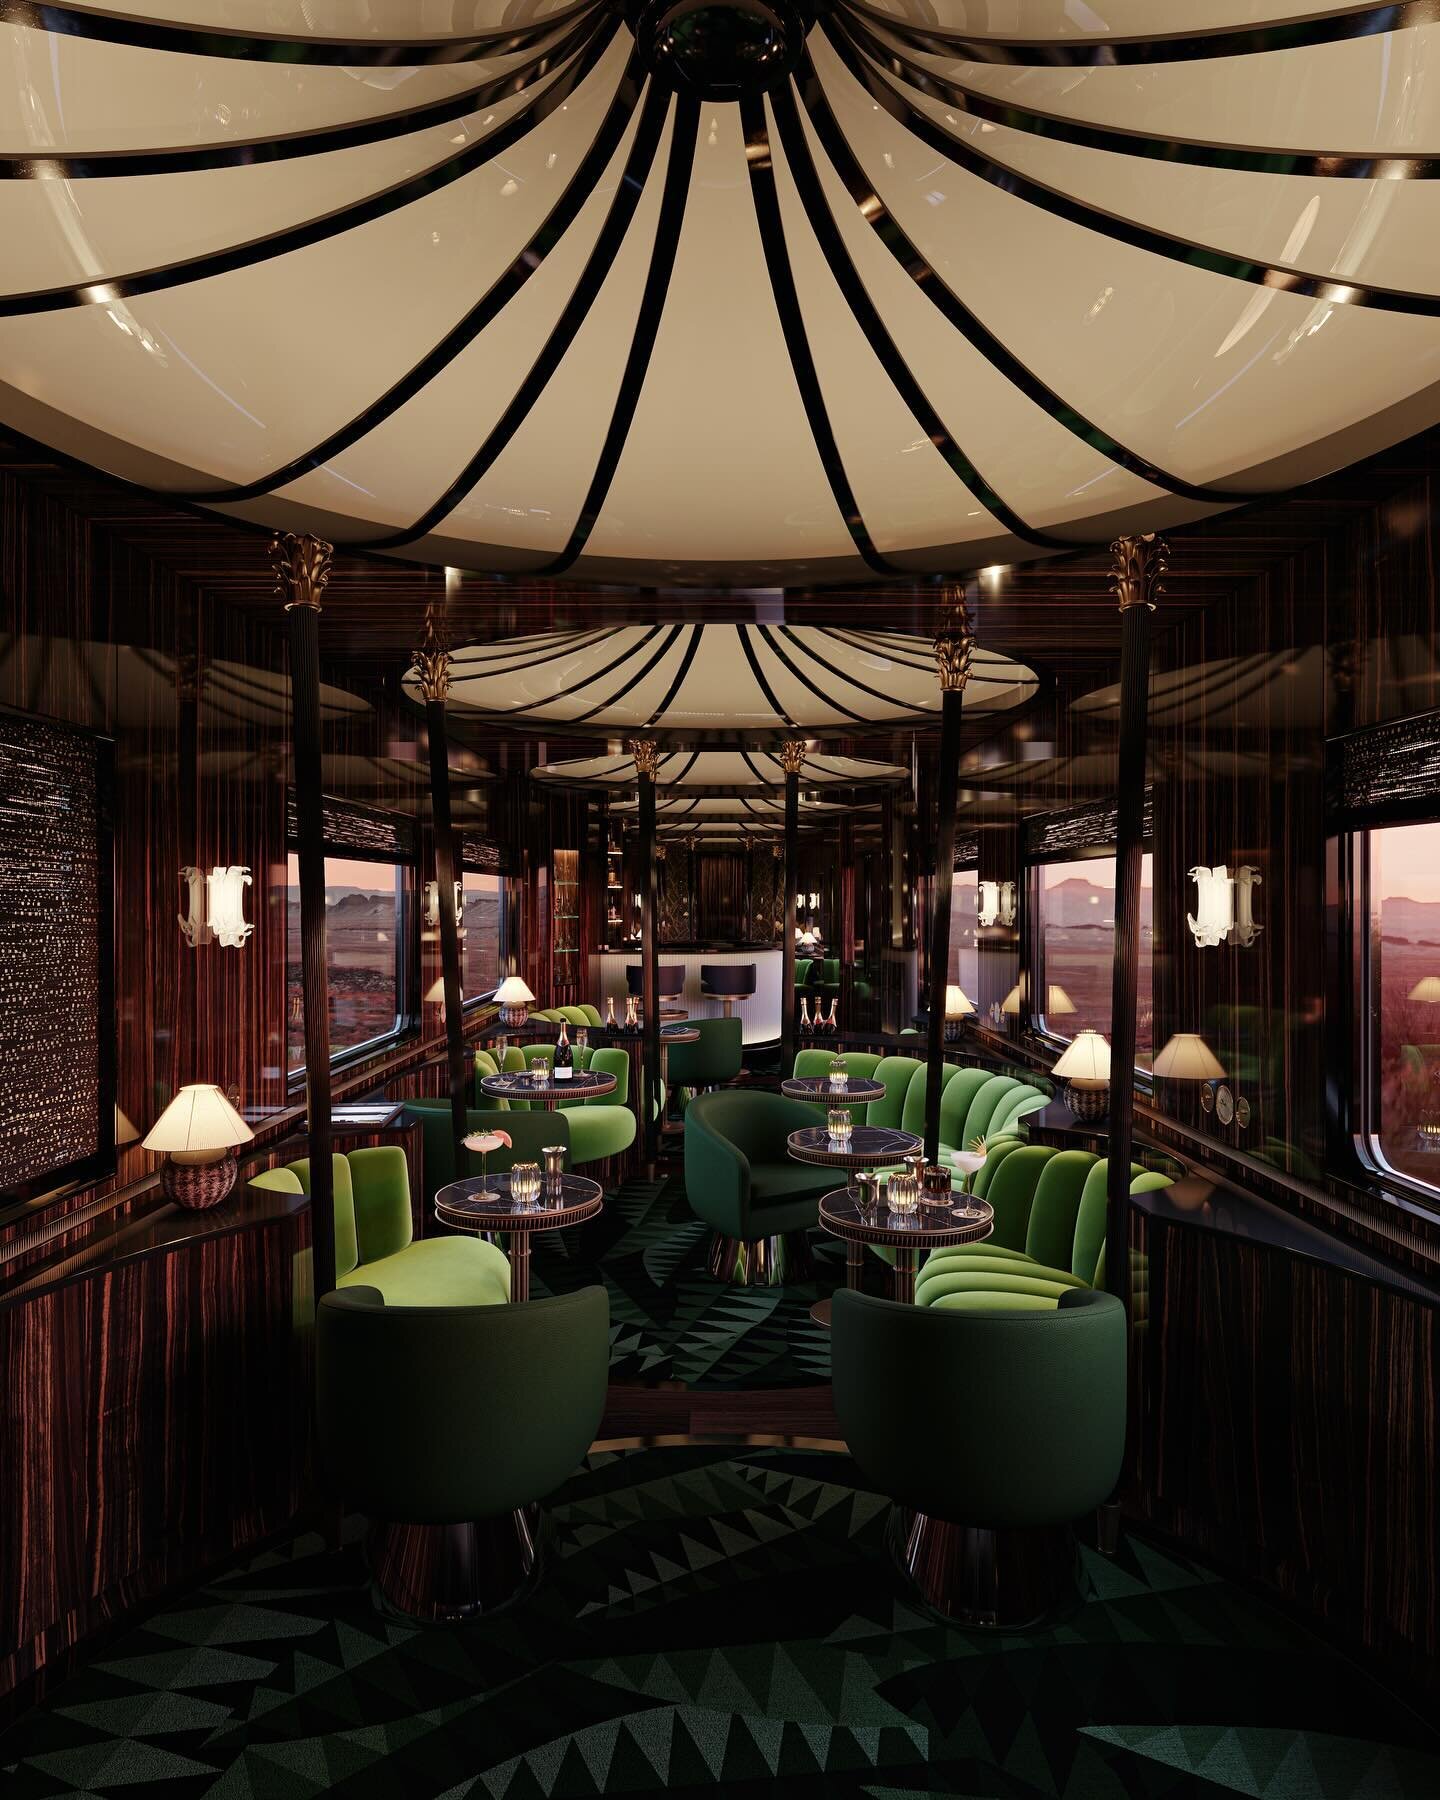 Under the large Second Empire-style domes of light, each supported by four columns, the intimate lounge bar emanate with spectacular green hues. An all-glass bar is the center piece, surrounded by a stunning green carpet concept by @atelierfevrier
De